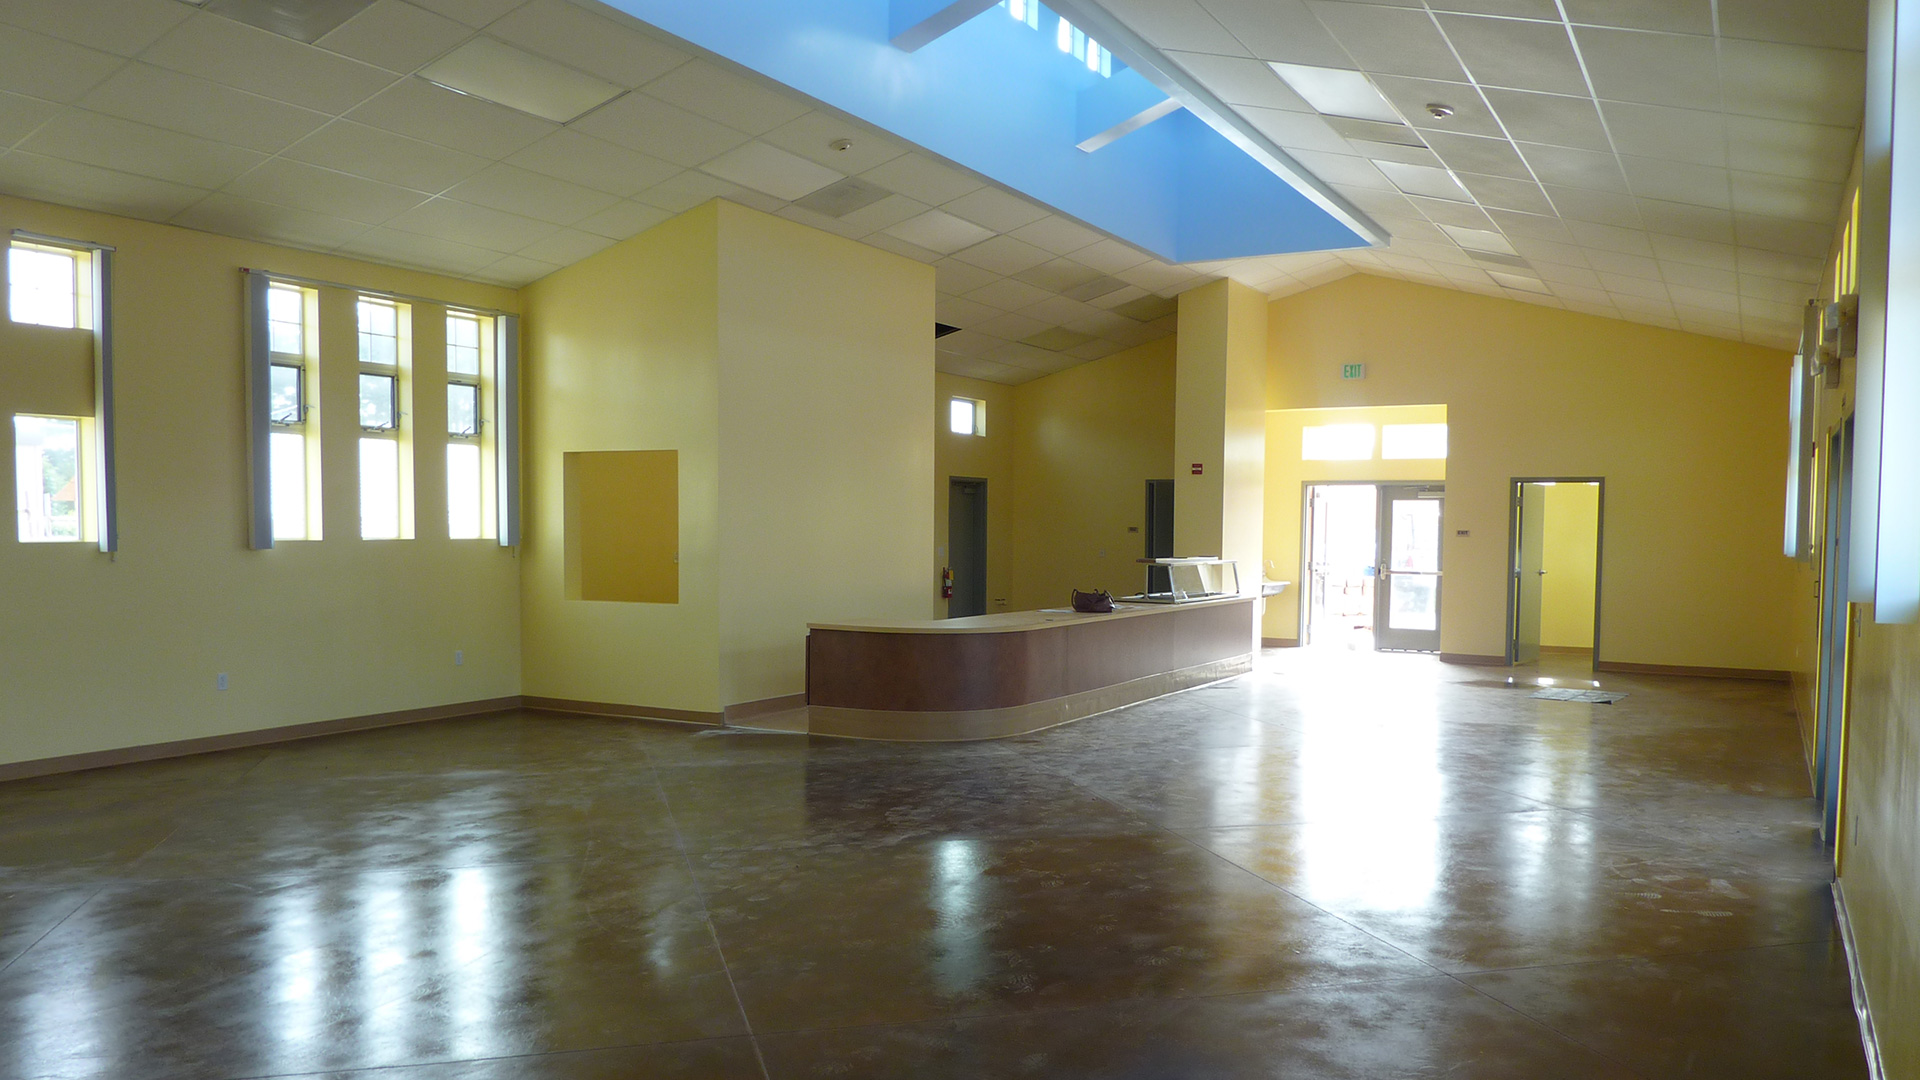 Interior of cafeteria before being furnished with seating or kitchen equipment.